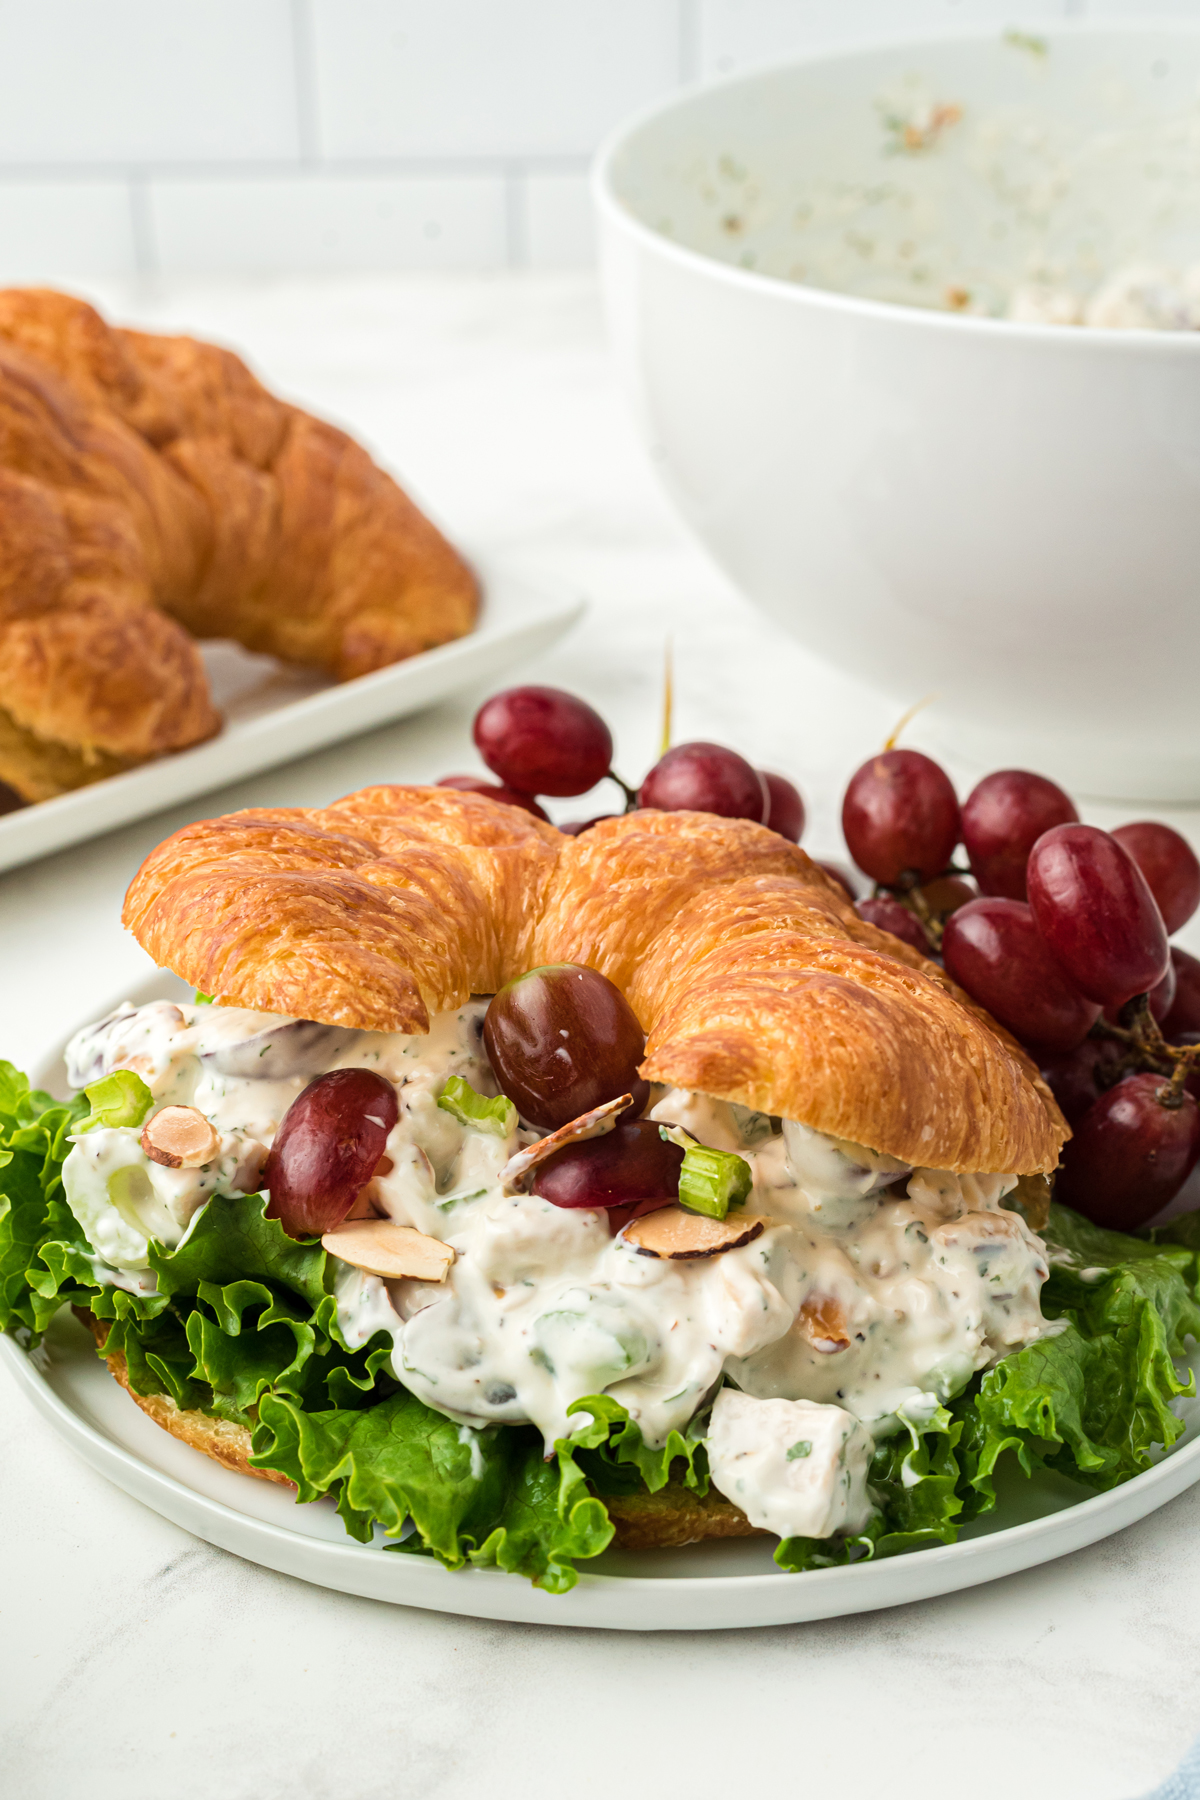 Upclose photo of Neiman Marcus Chicken Salad on white plate